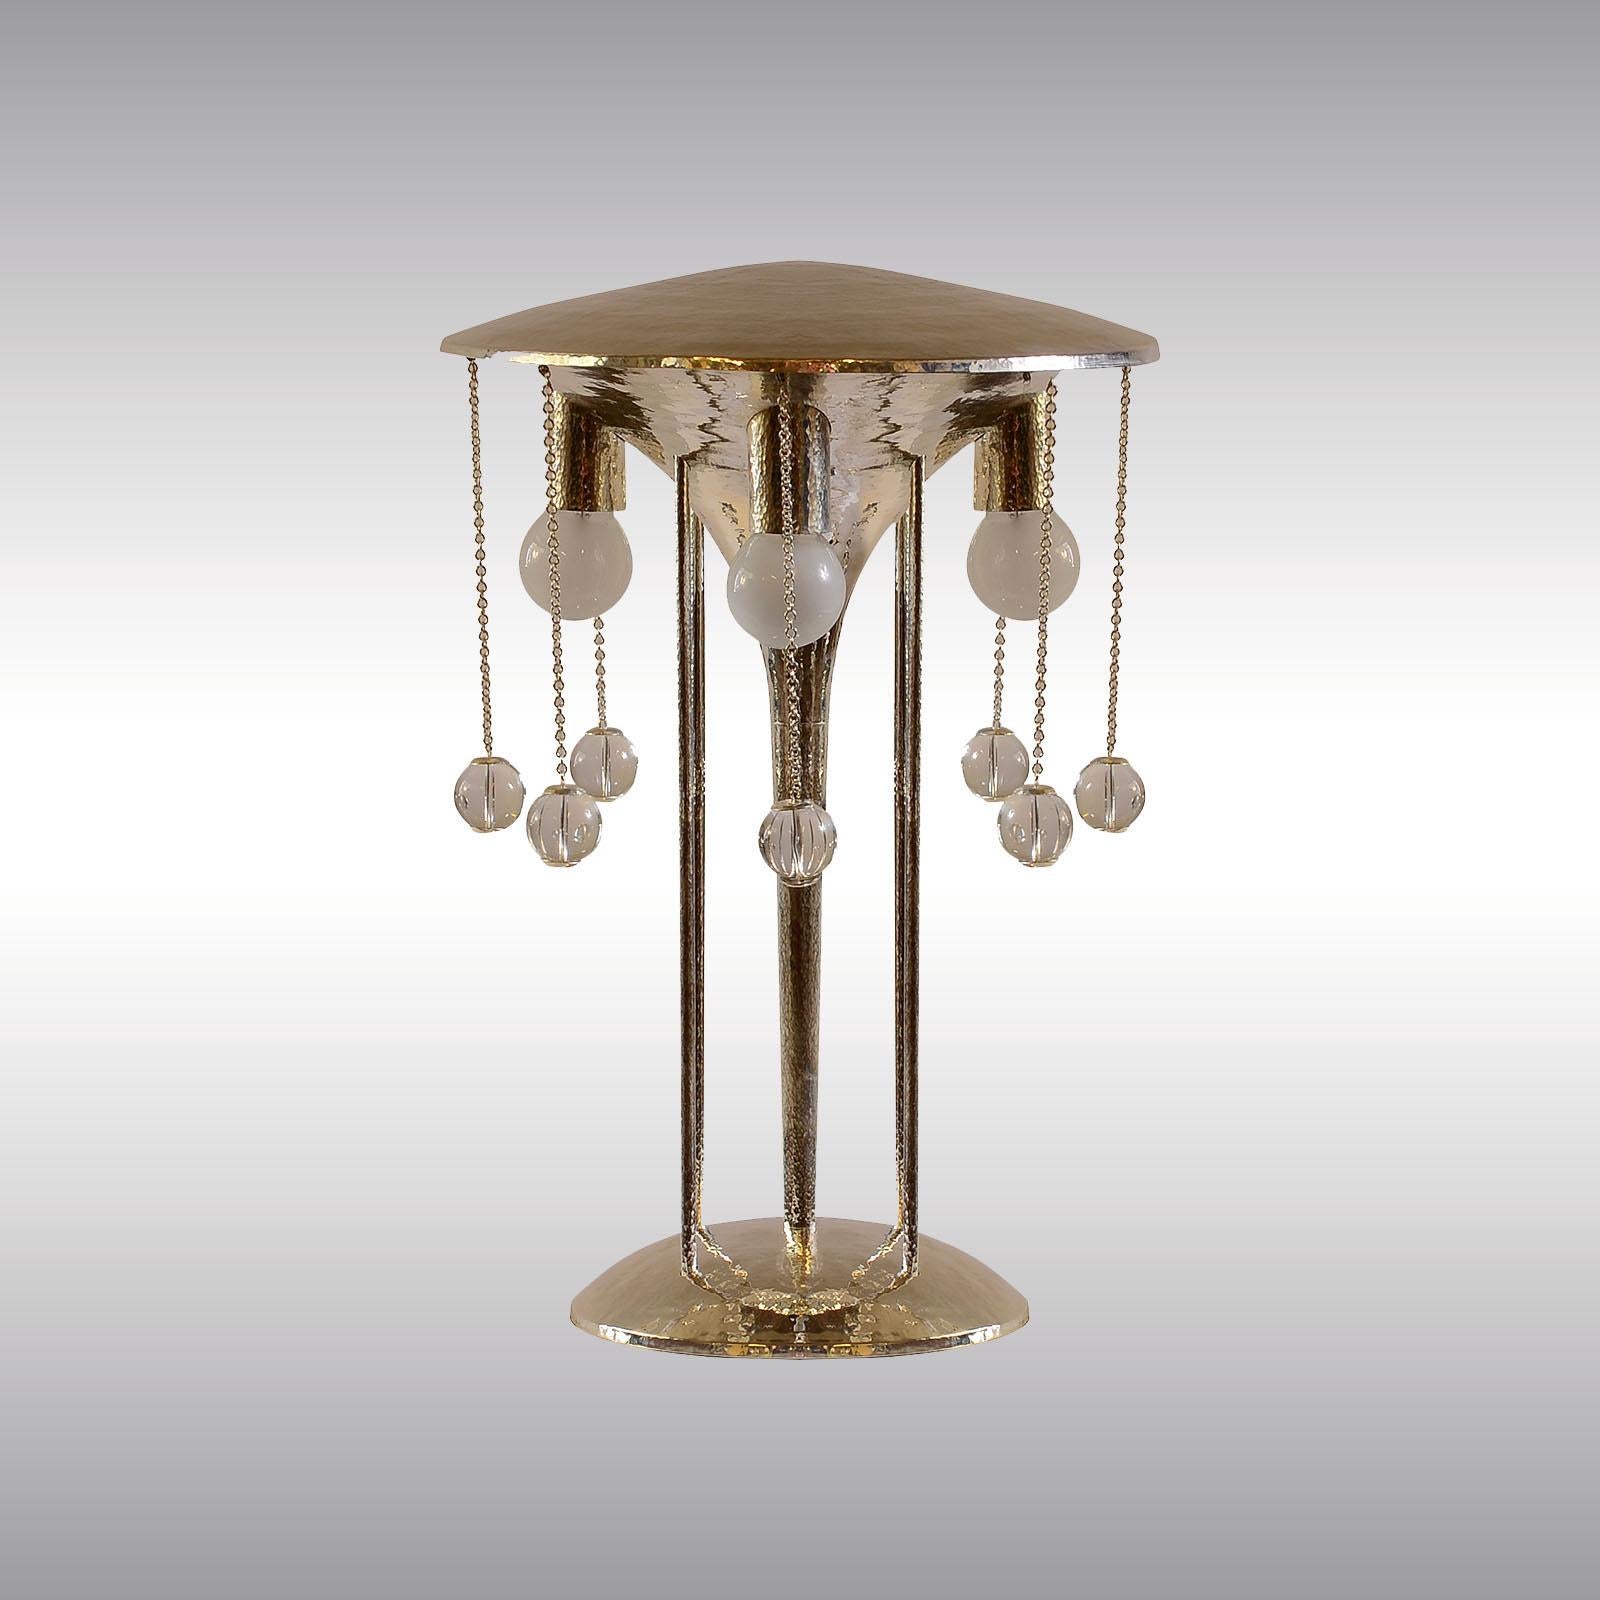 Vienna Secession Secessionist J. Hoffmann&Wiener Werkstätte Silvered Brass Table Lamp Re-Edition For Sale